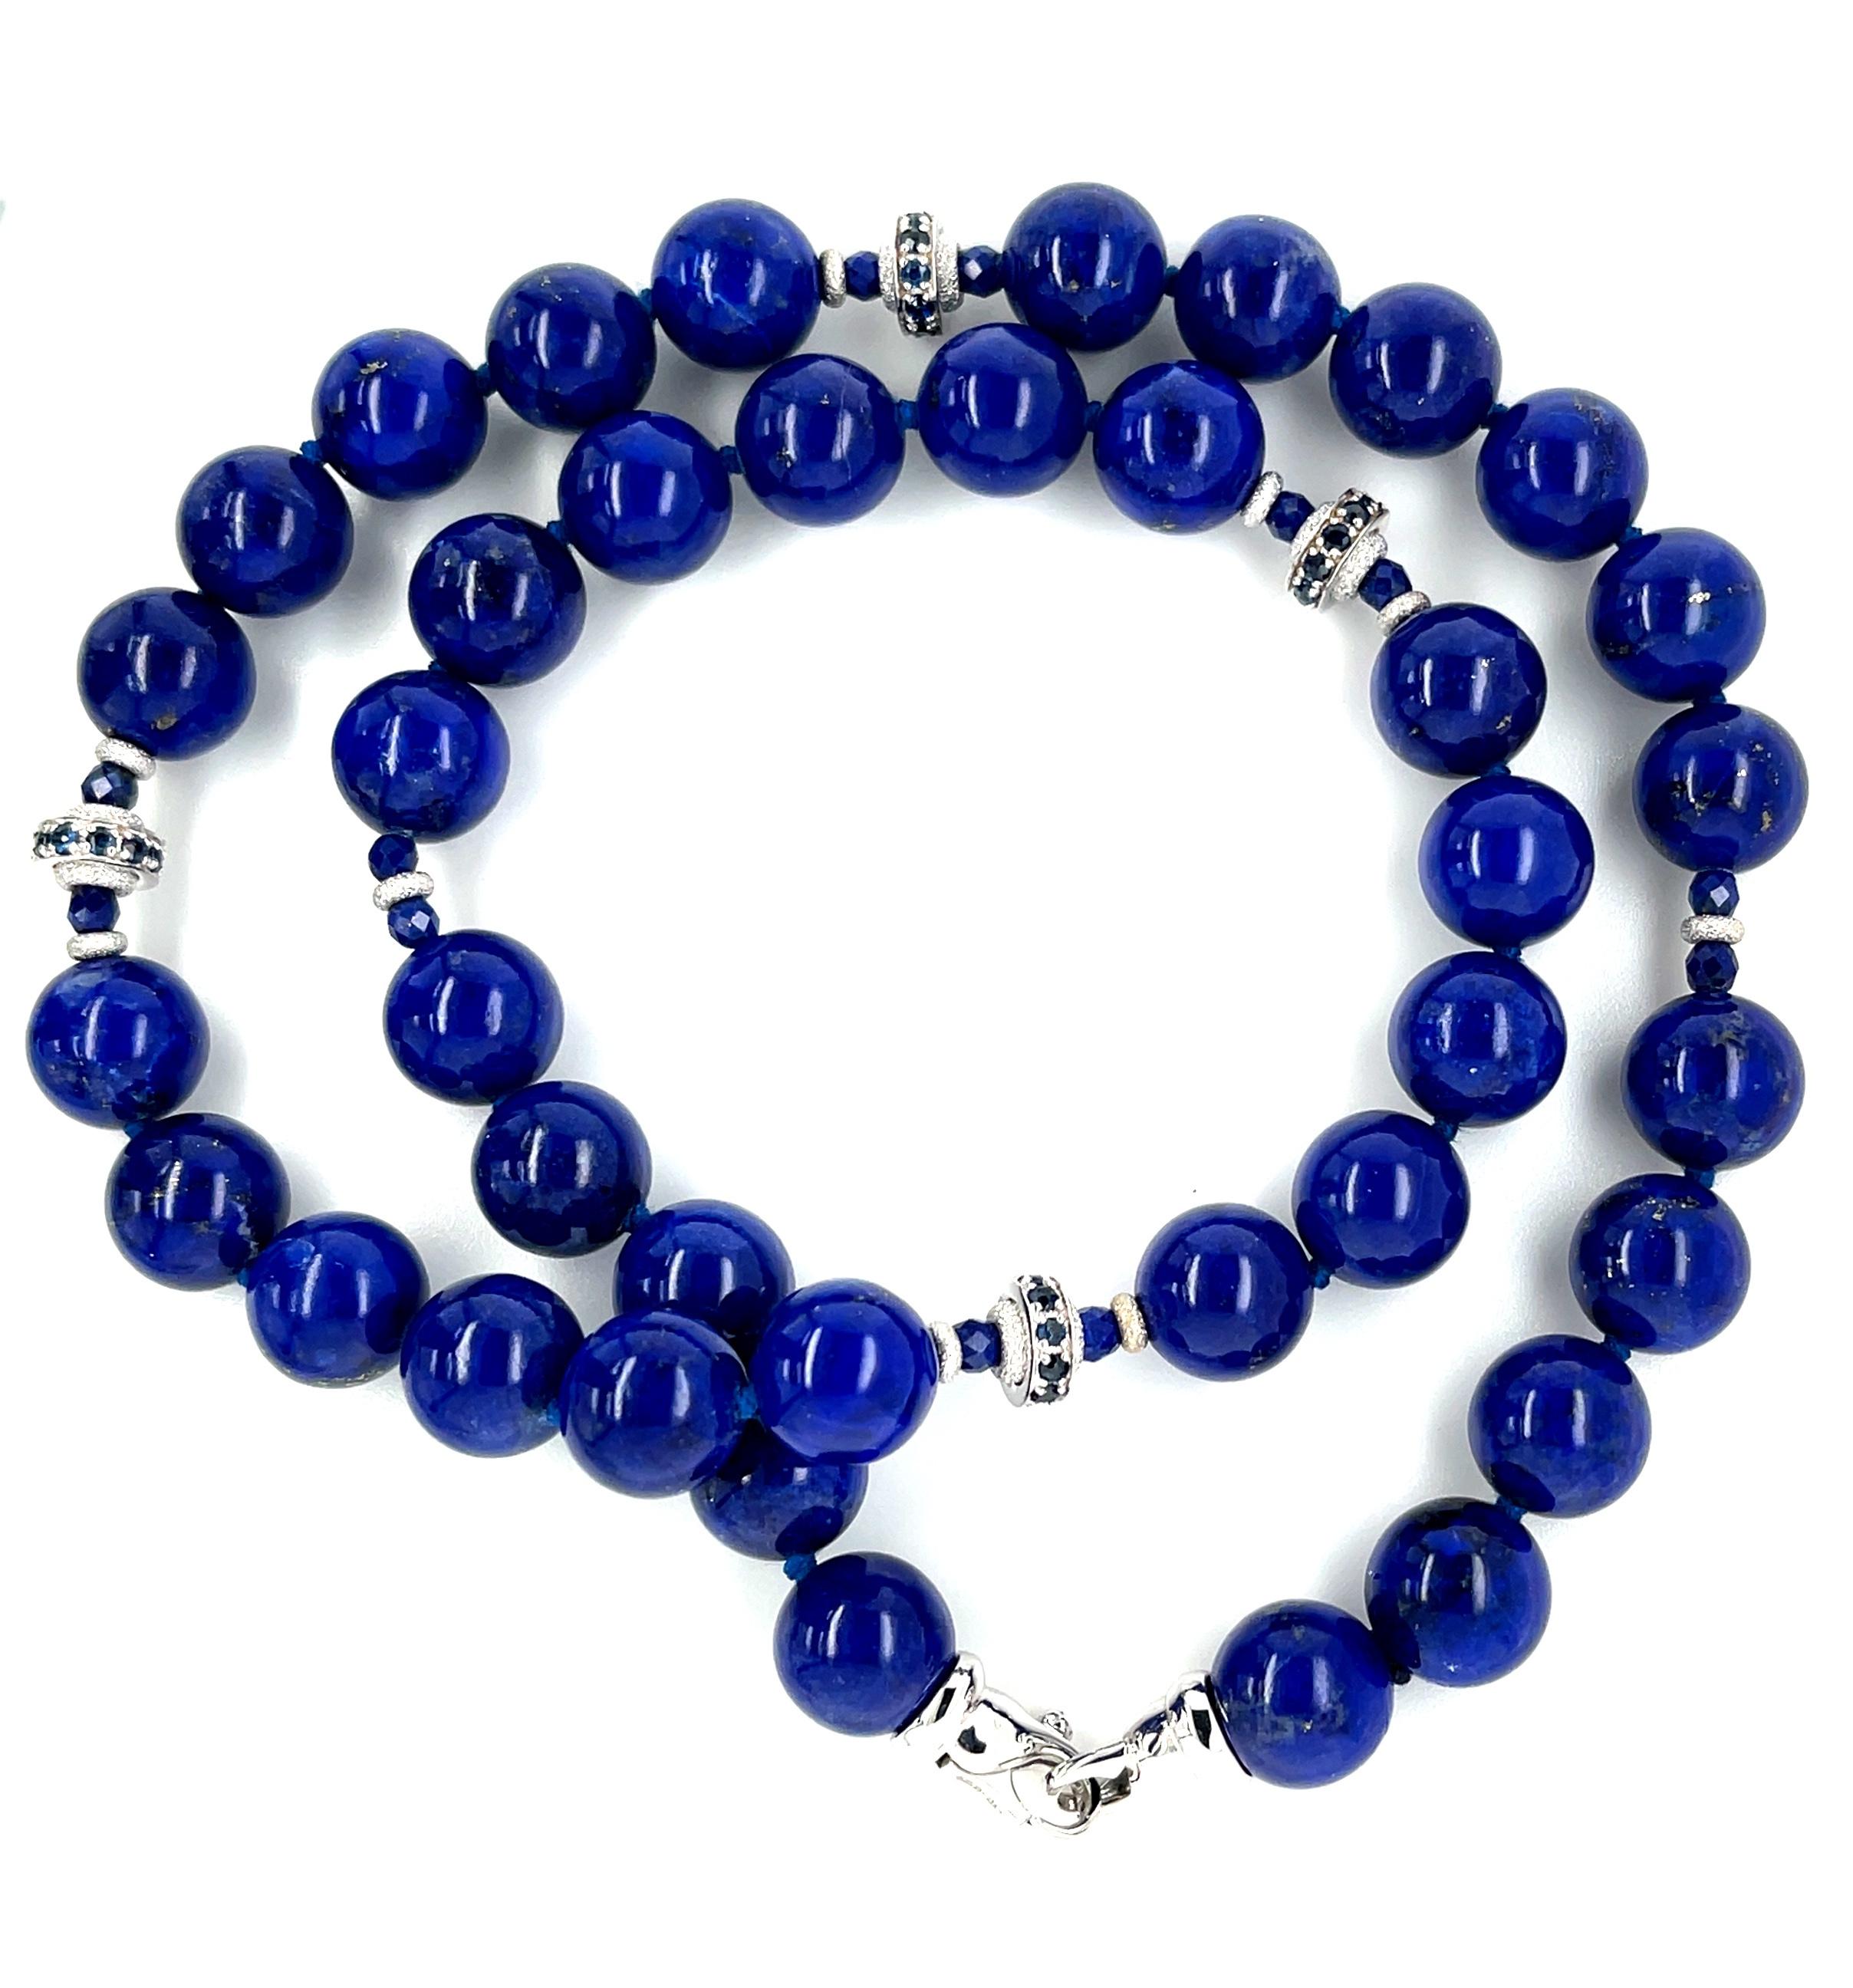 Artisan 10mm Round Lapis Lazuli, Faceted Sapphire Bead & White Gold Necklace, 19 Inches For Sale